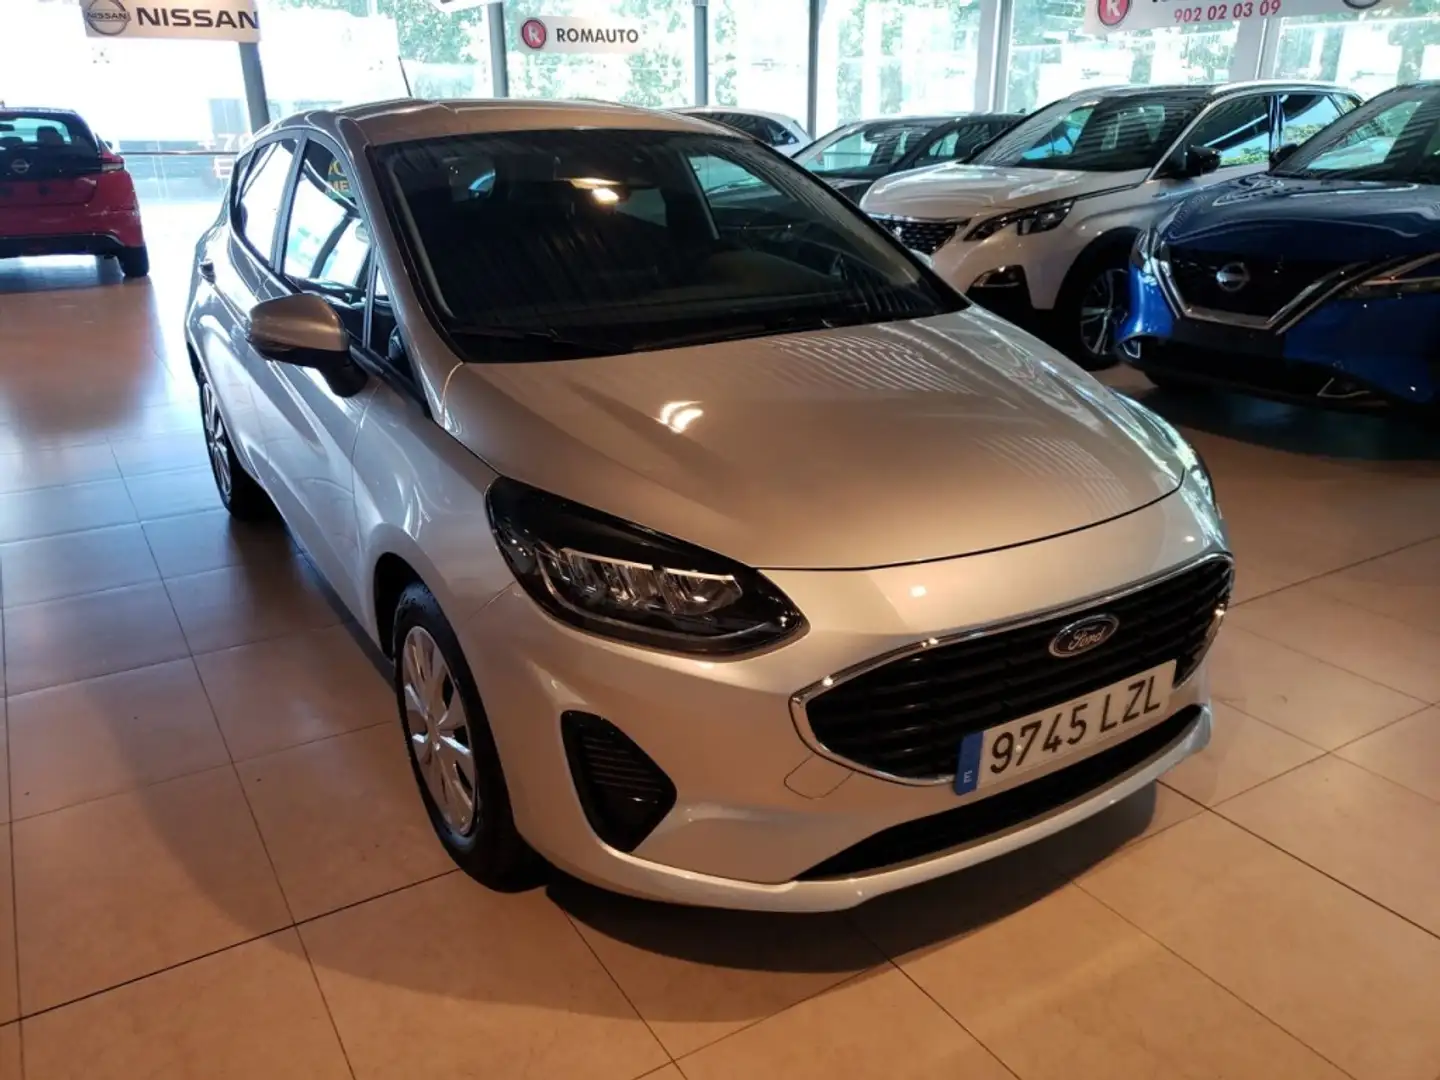 Ford Fiesta 1.1 IT-VCT 55KW TREND 75 5P - 2